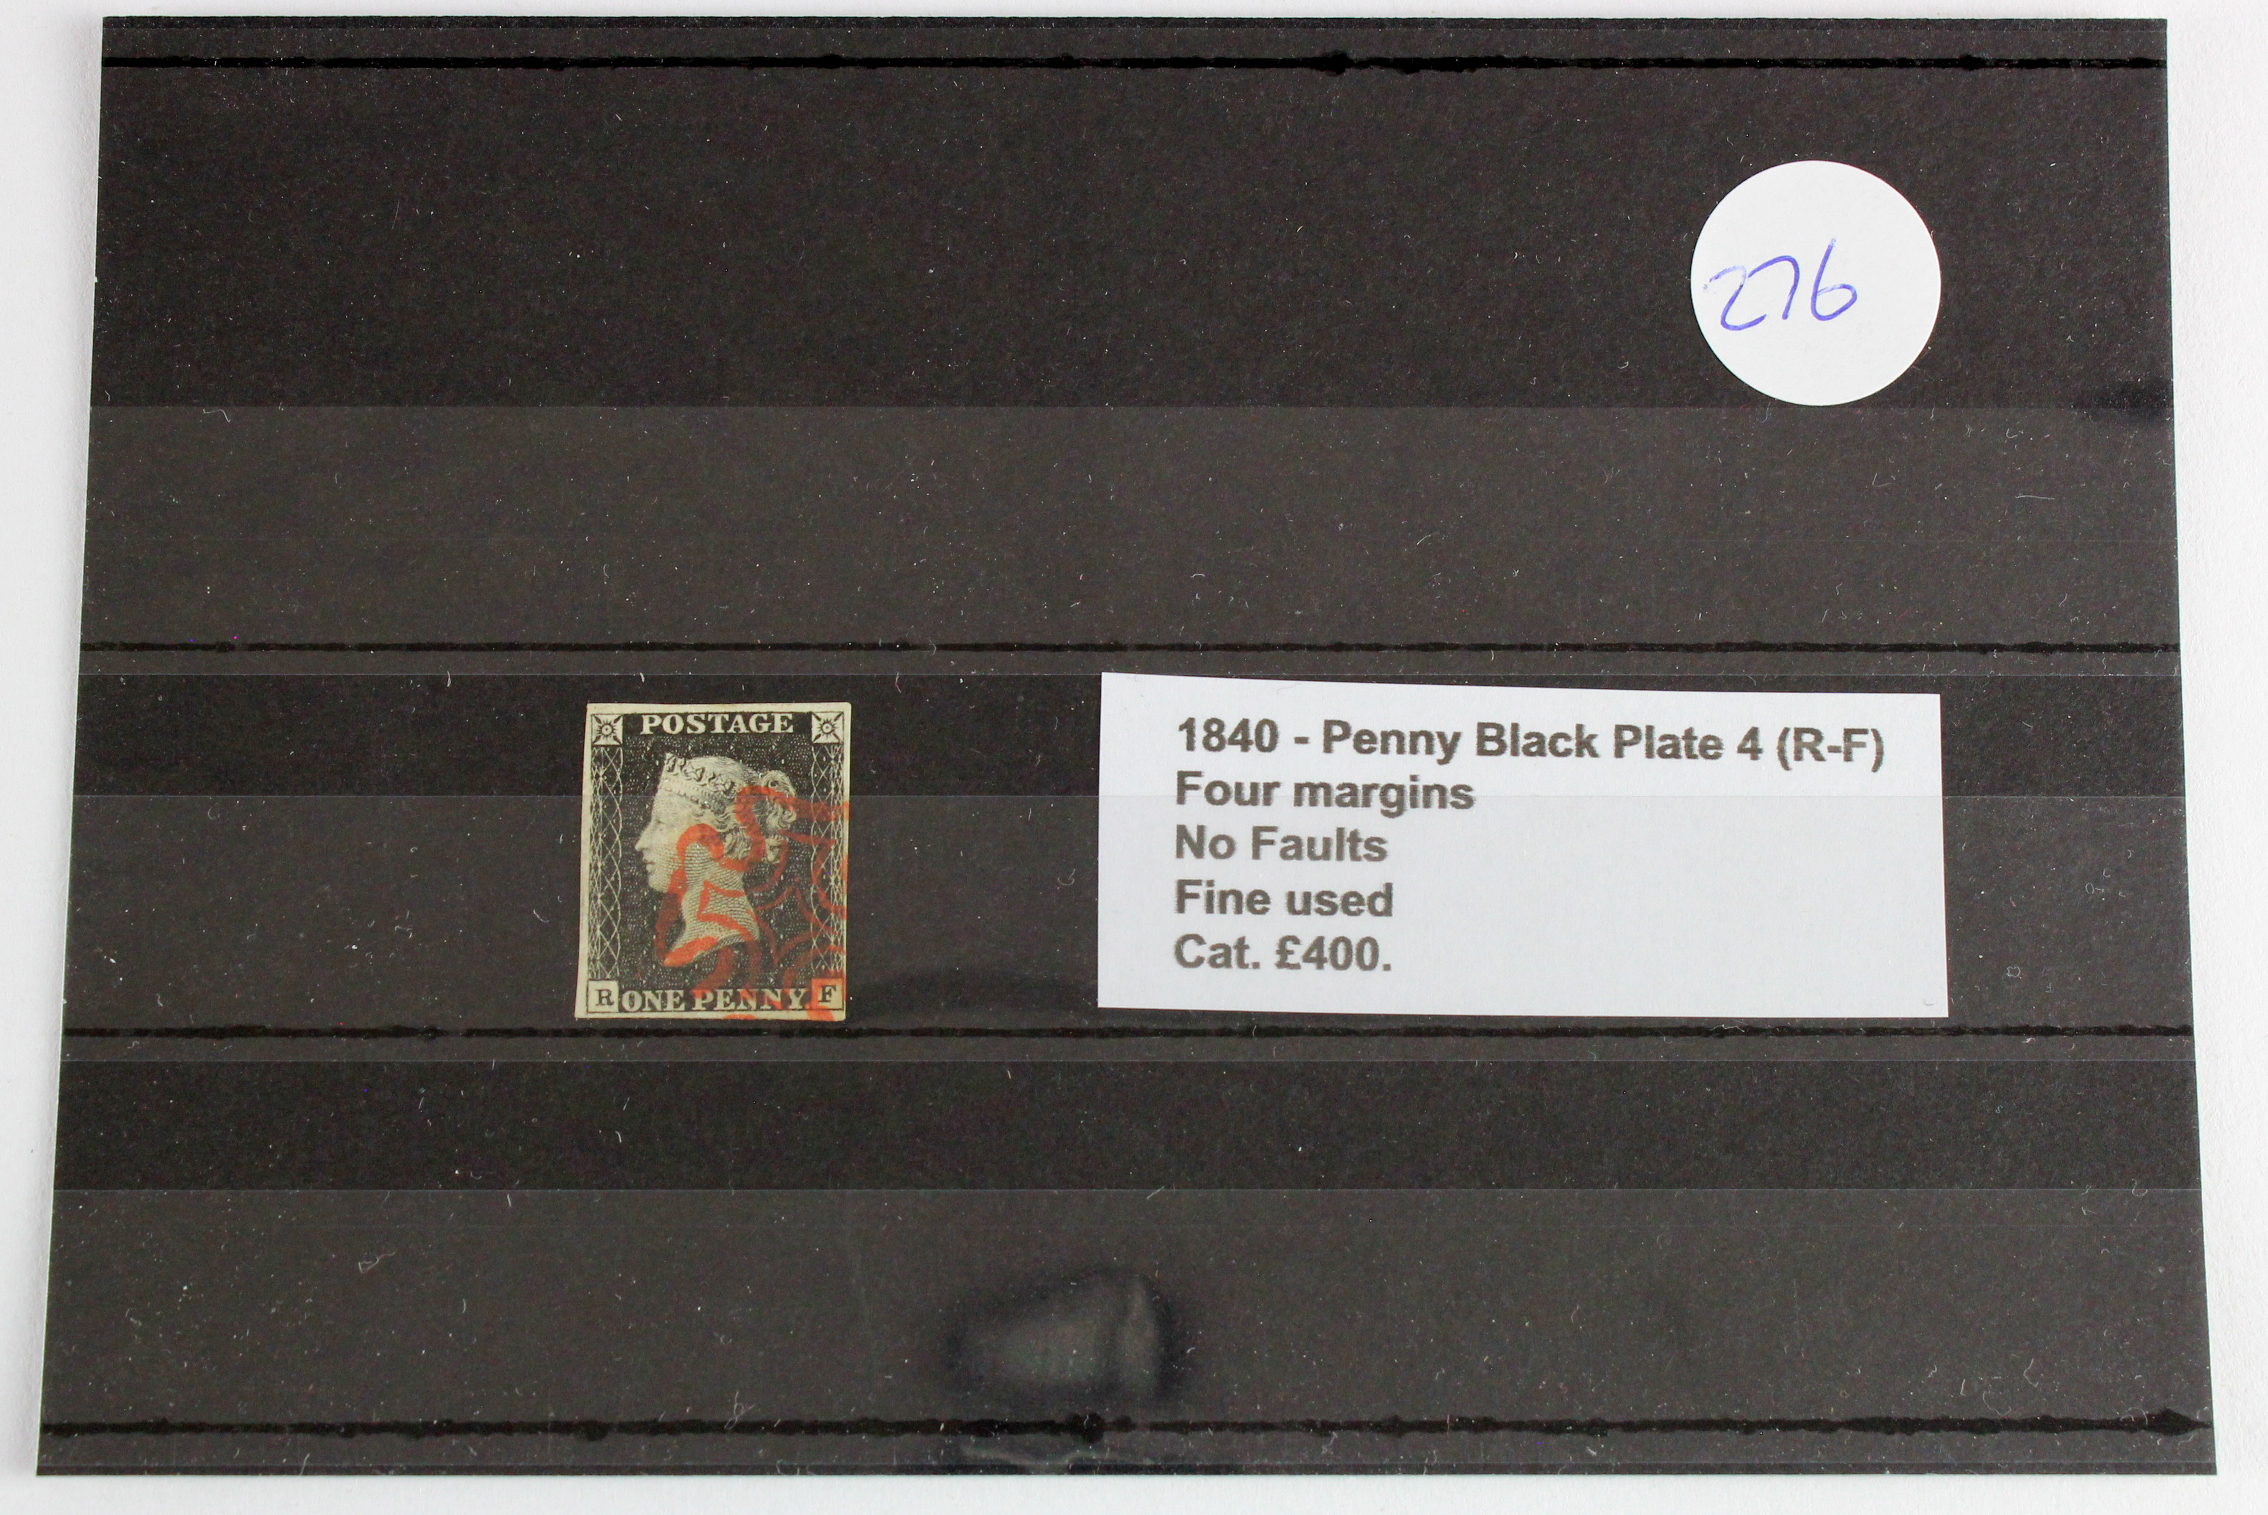 GB - QV 1840 Penny Black Plate 4 (R-F) four margins, no faults, fine used, cat £400